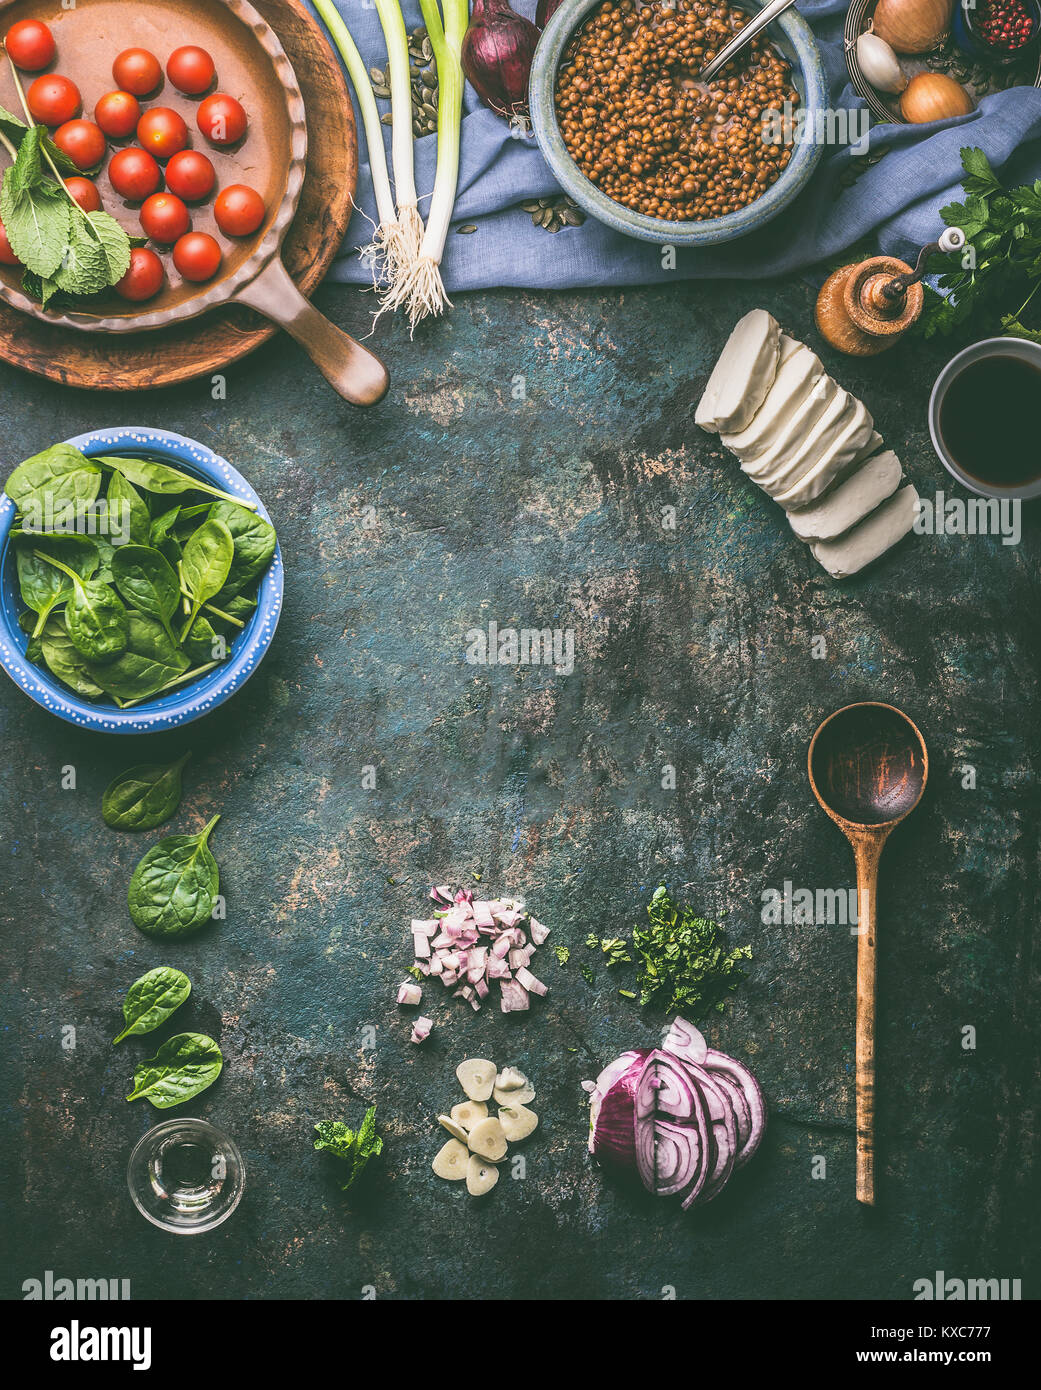 Vegetarian food cooking background. Spinach,tomatoes, lentil and fresh seasoning with cooking spoon on rustic kitchen table background, top view, fram Stock Photo